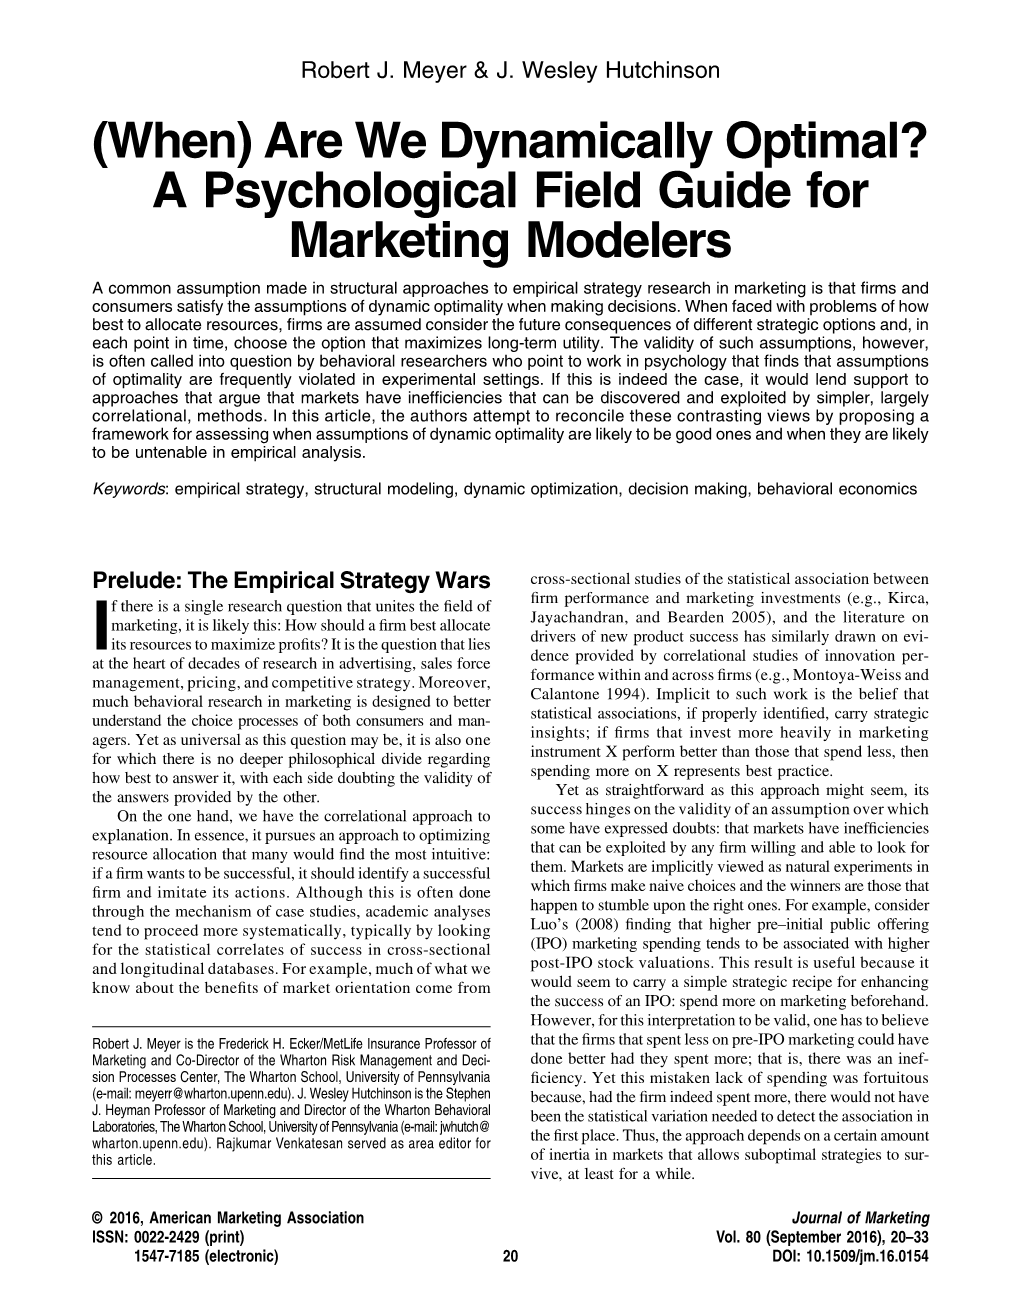 A Psychological Field Guide for Marketing Modelers